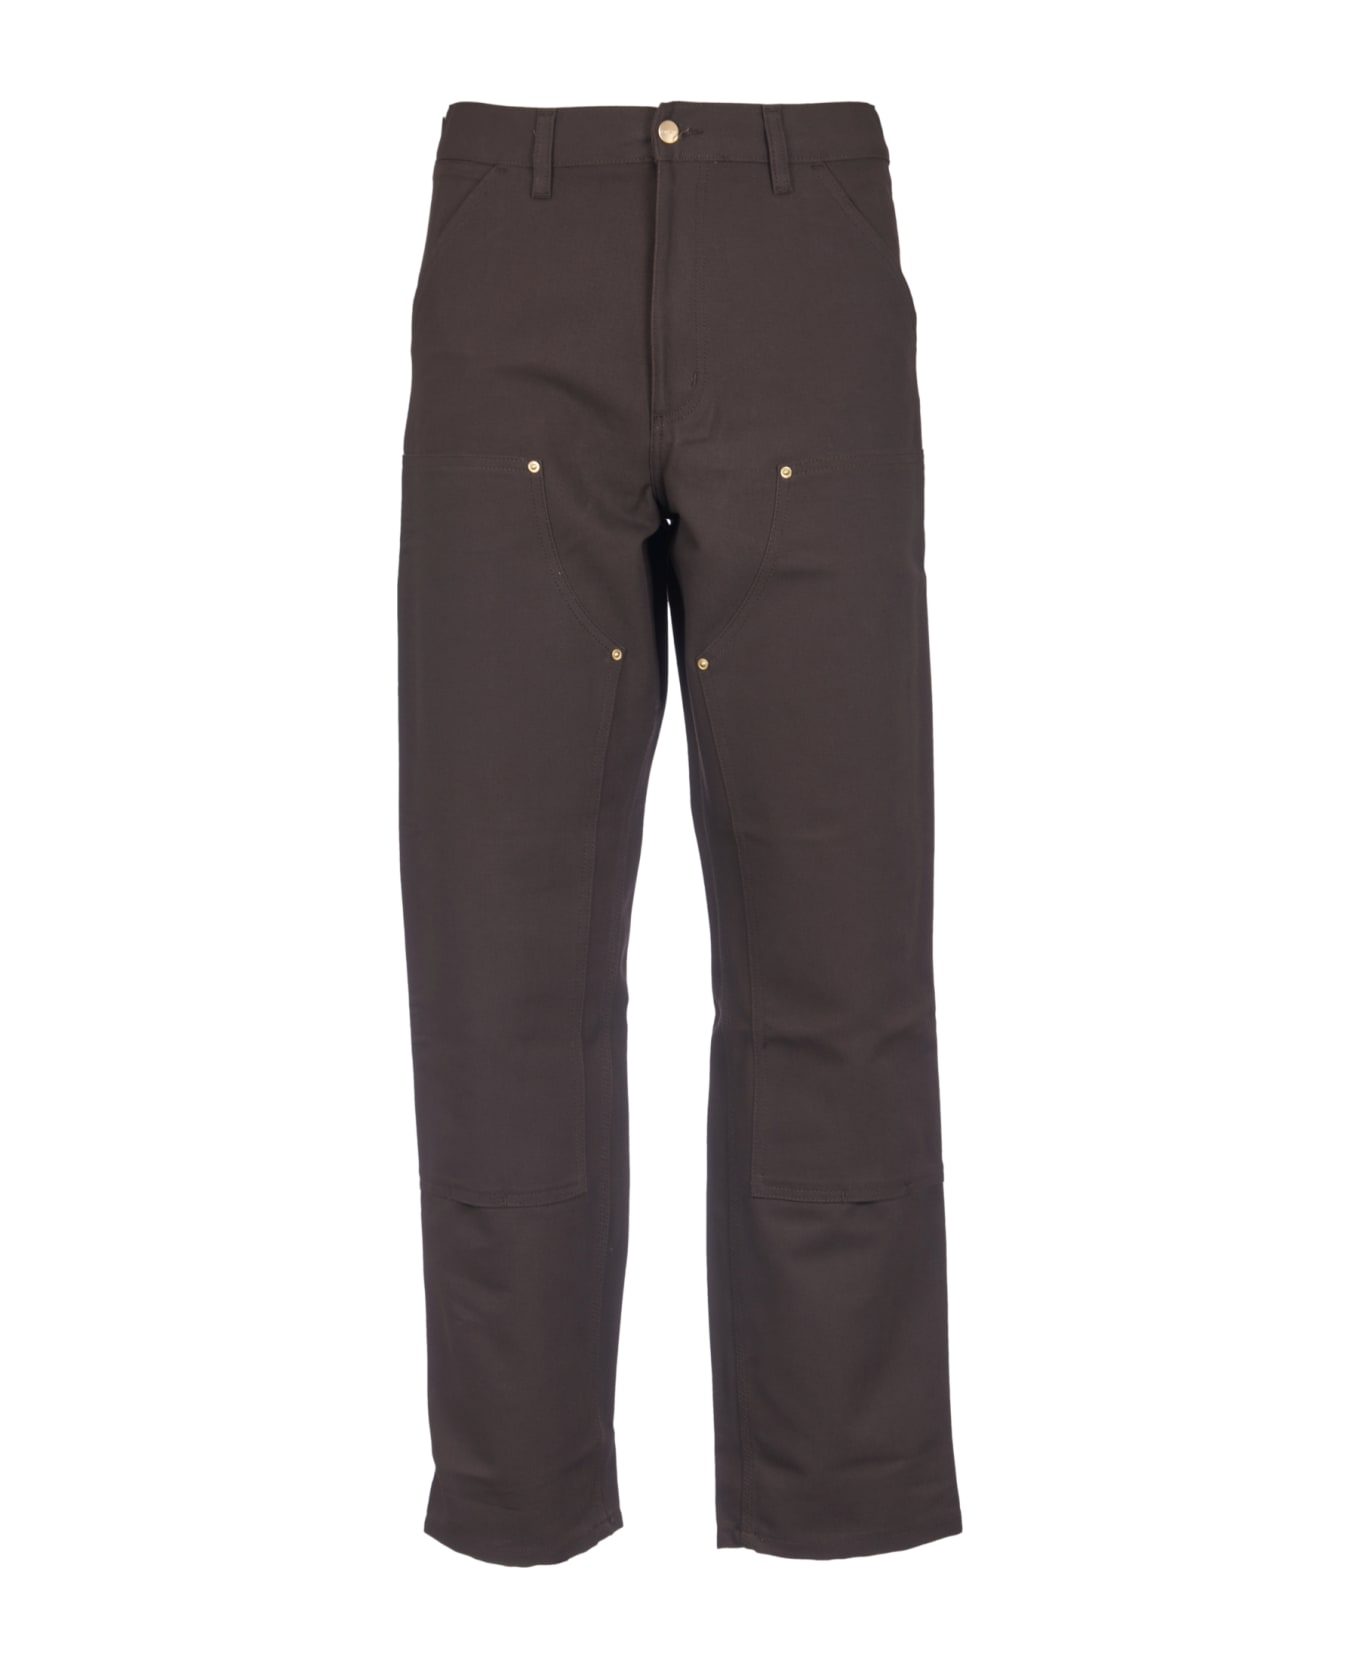 Carhartt Straight Buttoned Trousers - Tobacco